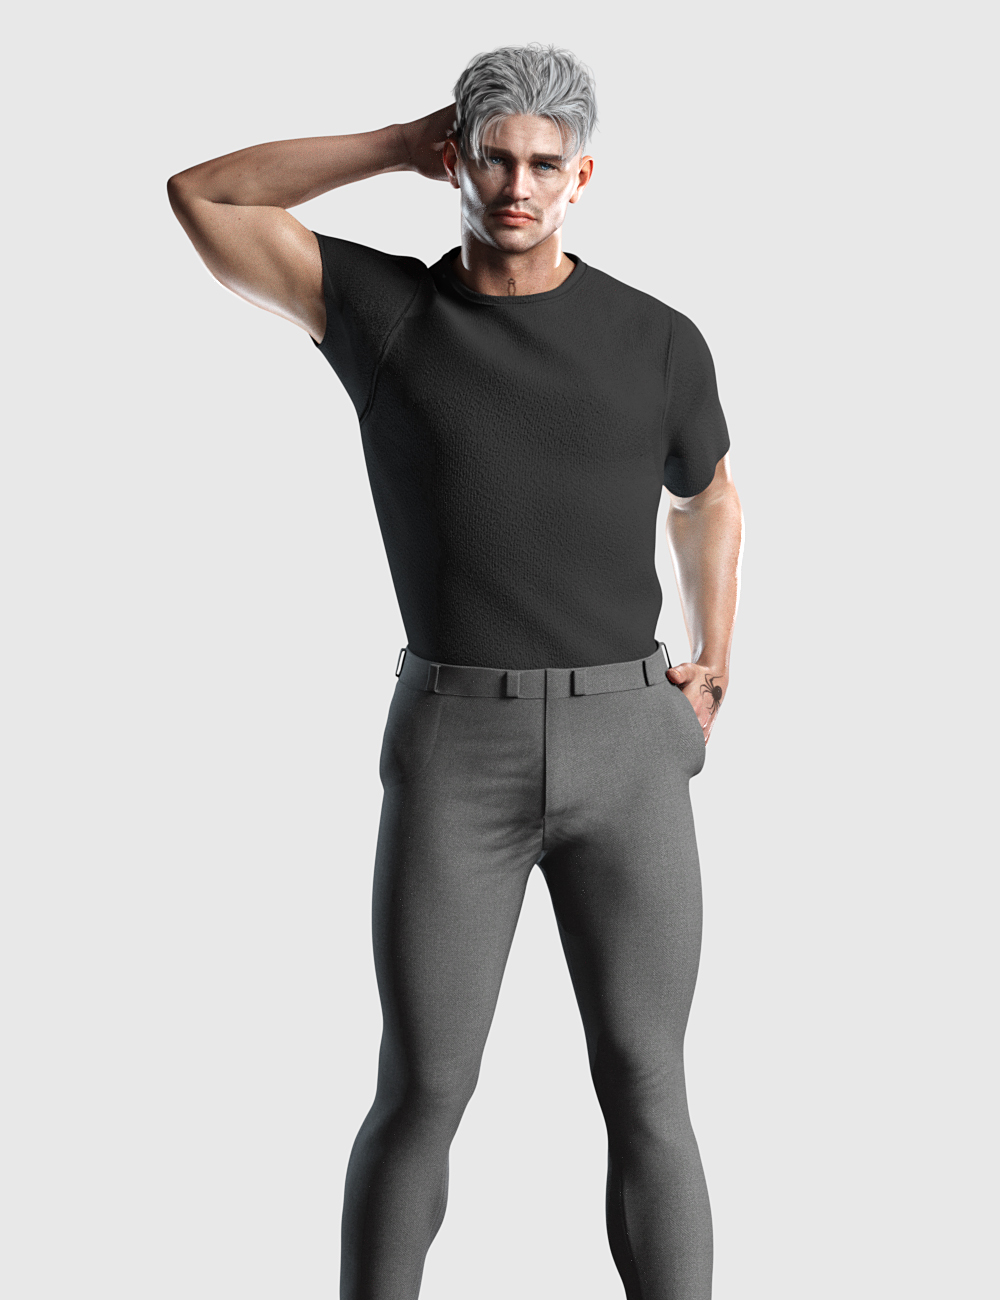 Dforce Tucked Tee Outfit For Genesis 8 And 8 1 Males Daz 3d